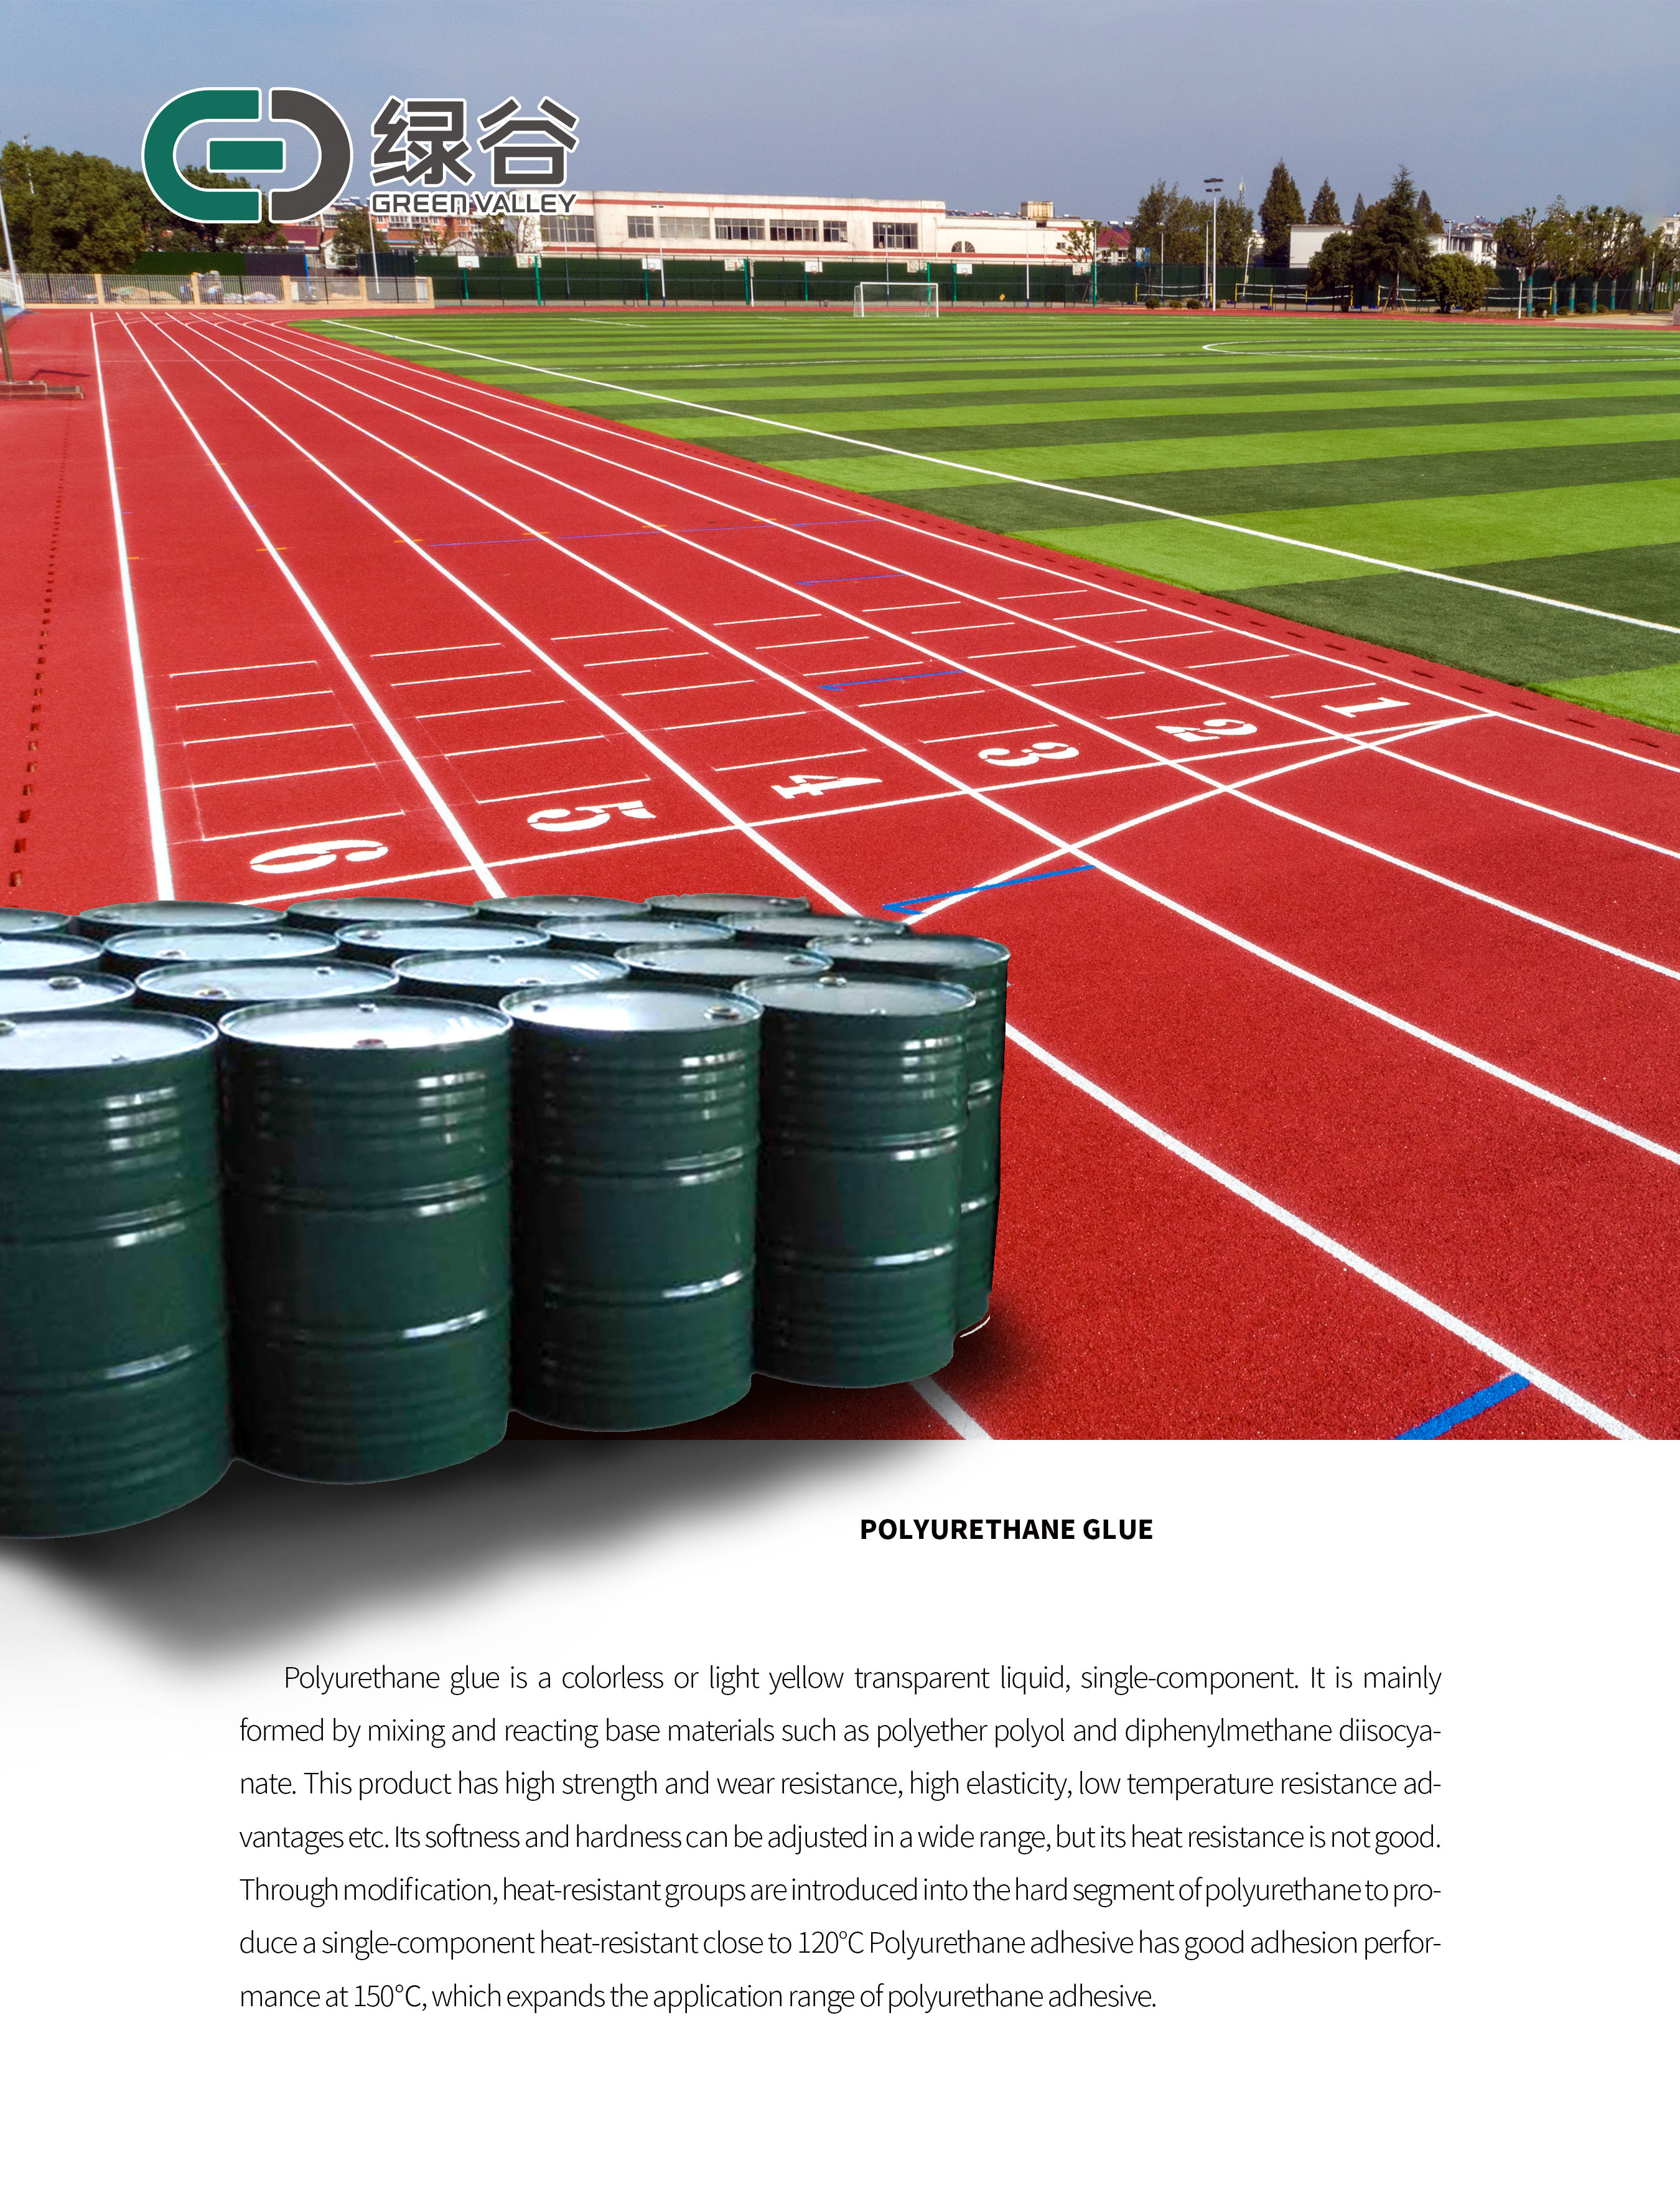 Polyurethane Glue Binders PU Binder for Rubber Tiles, Synthetic Track, Environmental Track